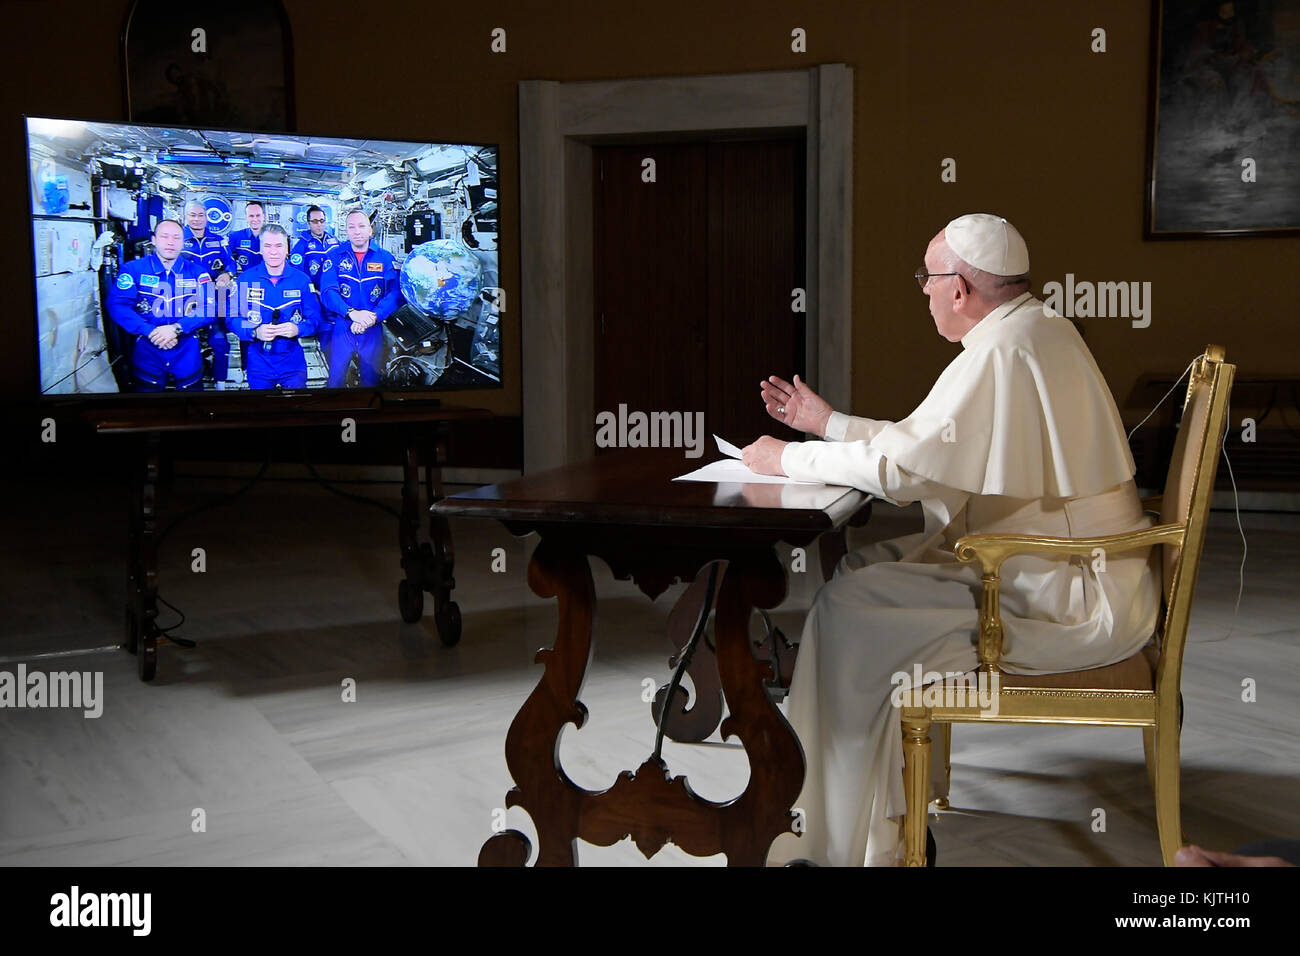 Pope Francis During A Live Audio Video Meeting With Crew Of